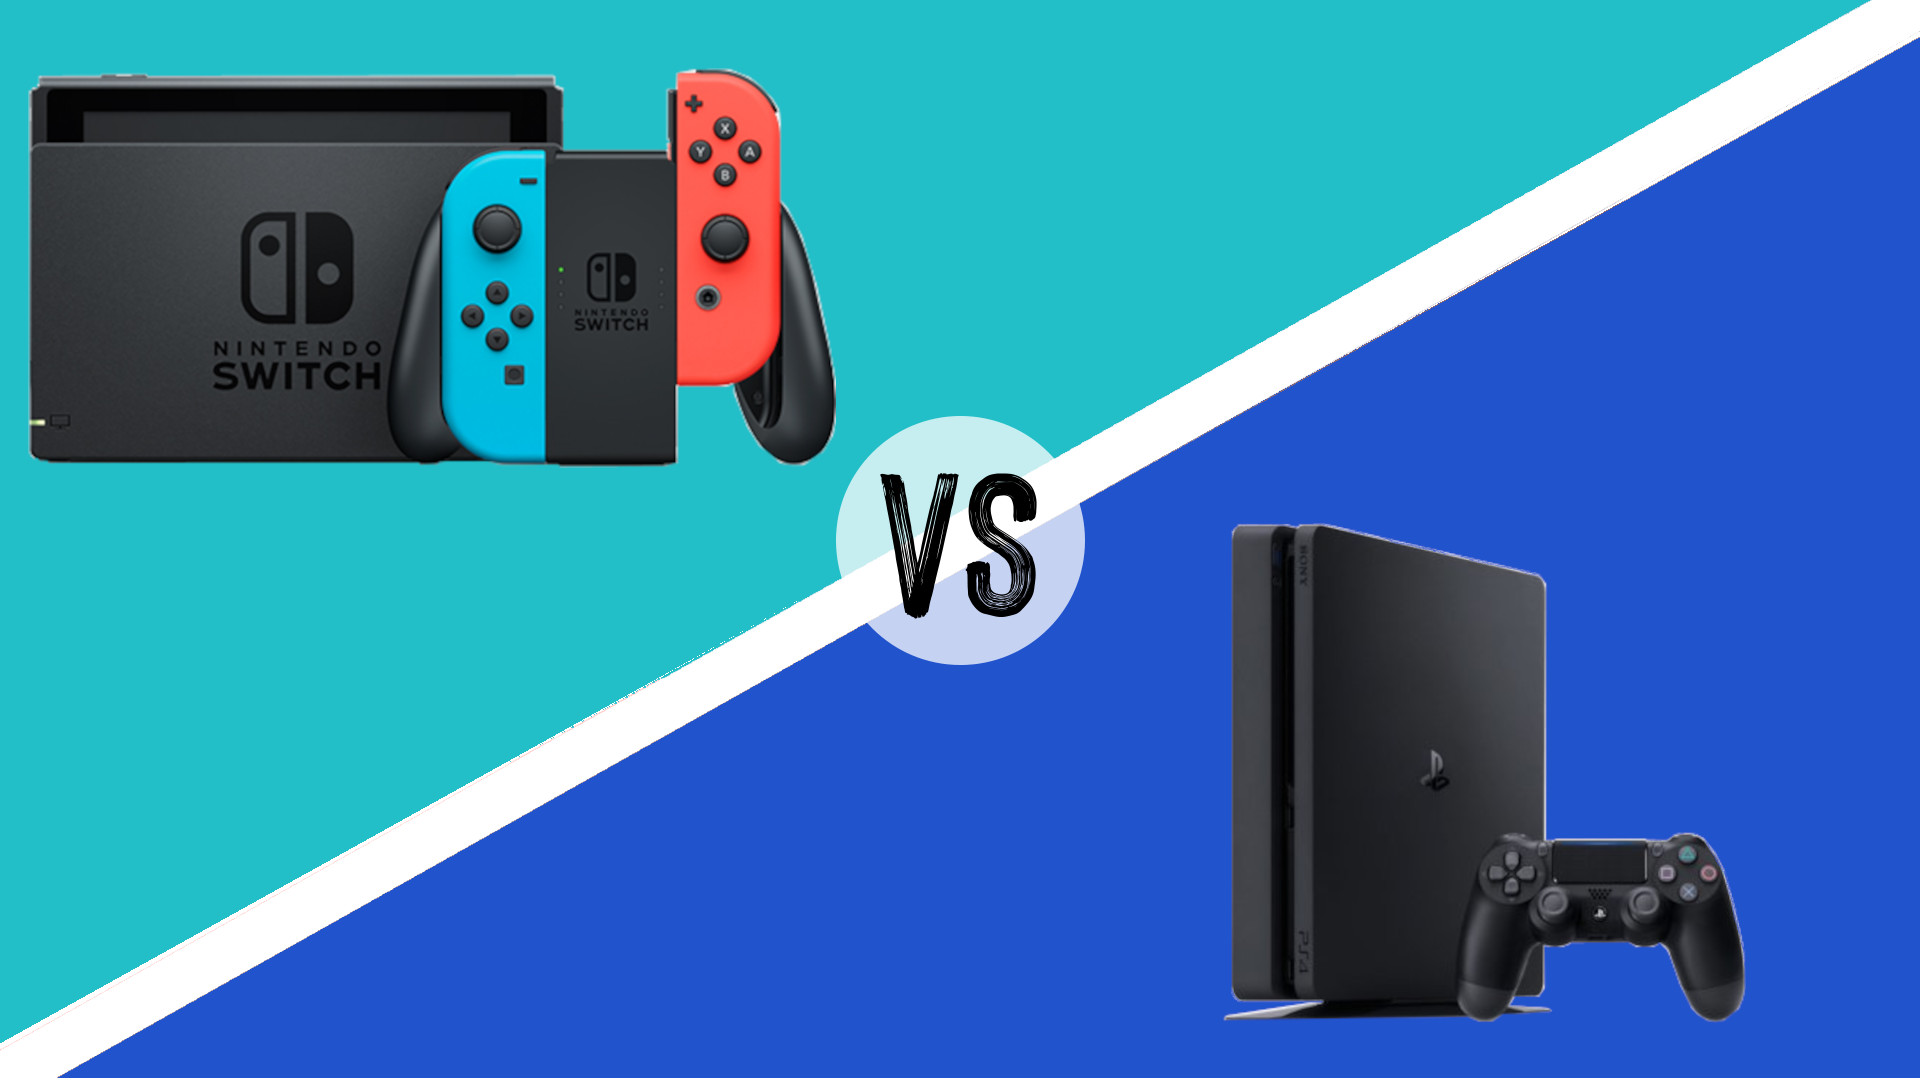 Nintendo Switch vs PS4: Which should you buy? Creative